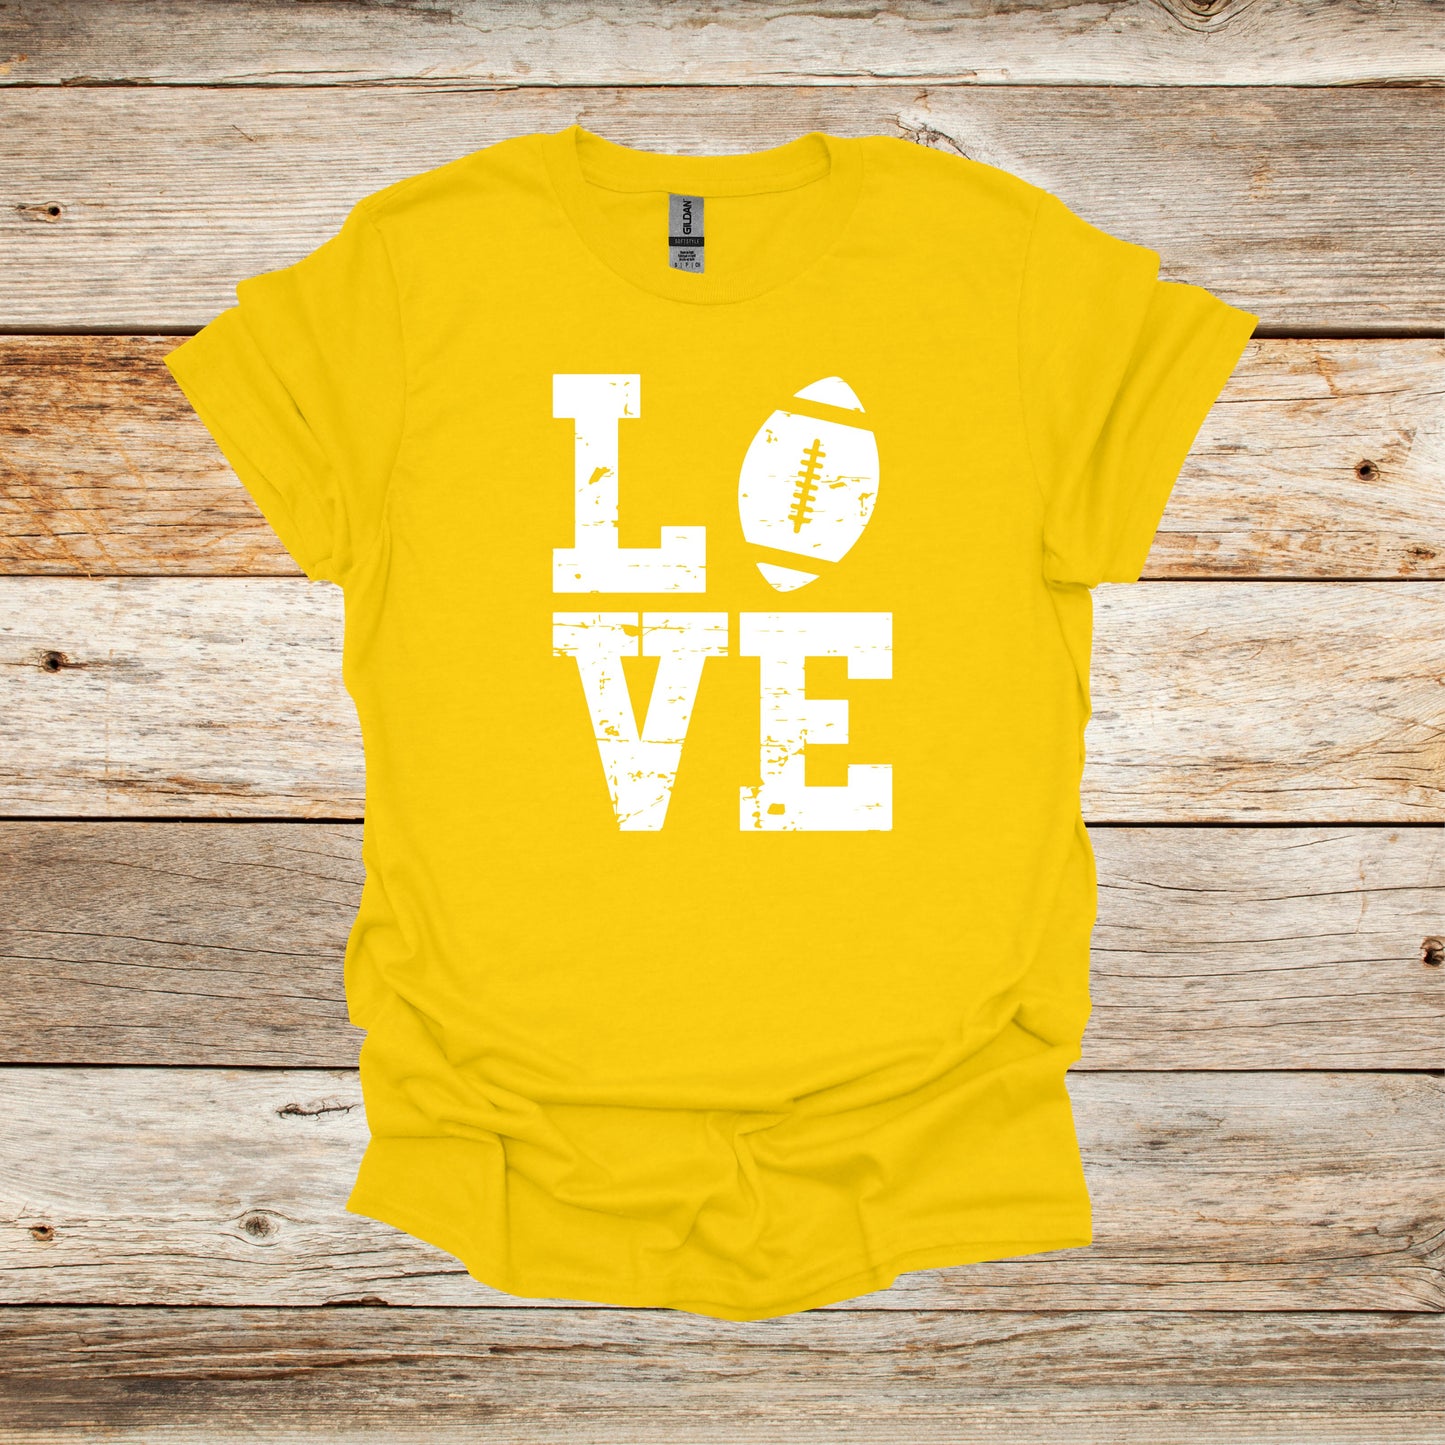 Football T-Shirt - LOVE - Adult and Children's Tee Shirts - Sports T-Shirts Graphic Avenue Daisy Adult Small 